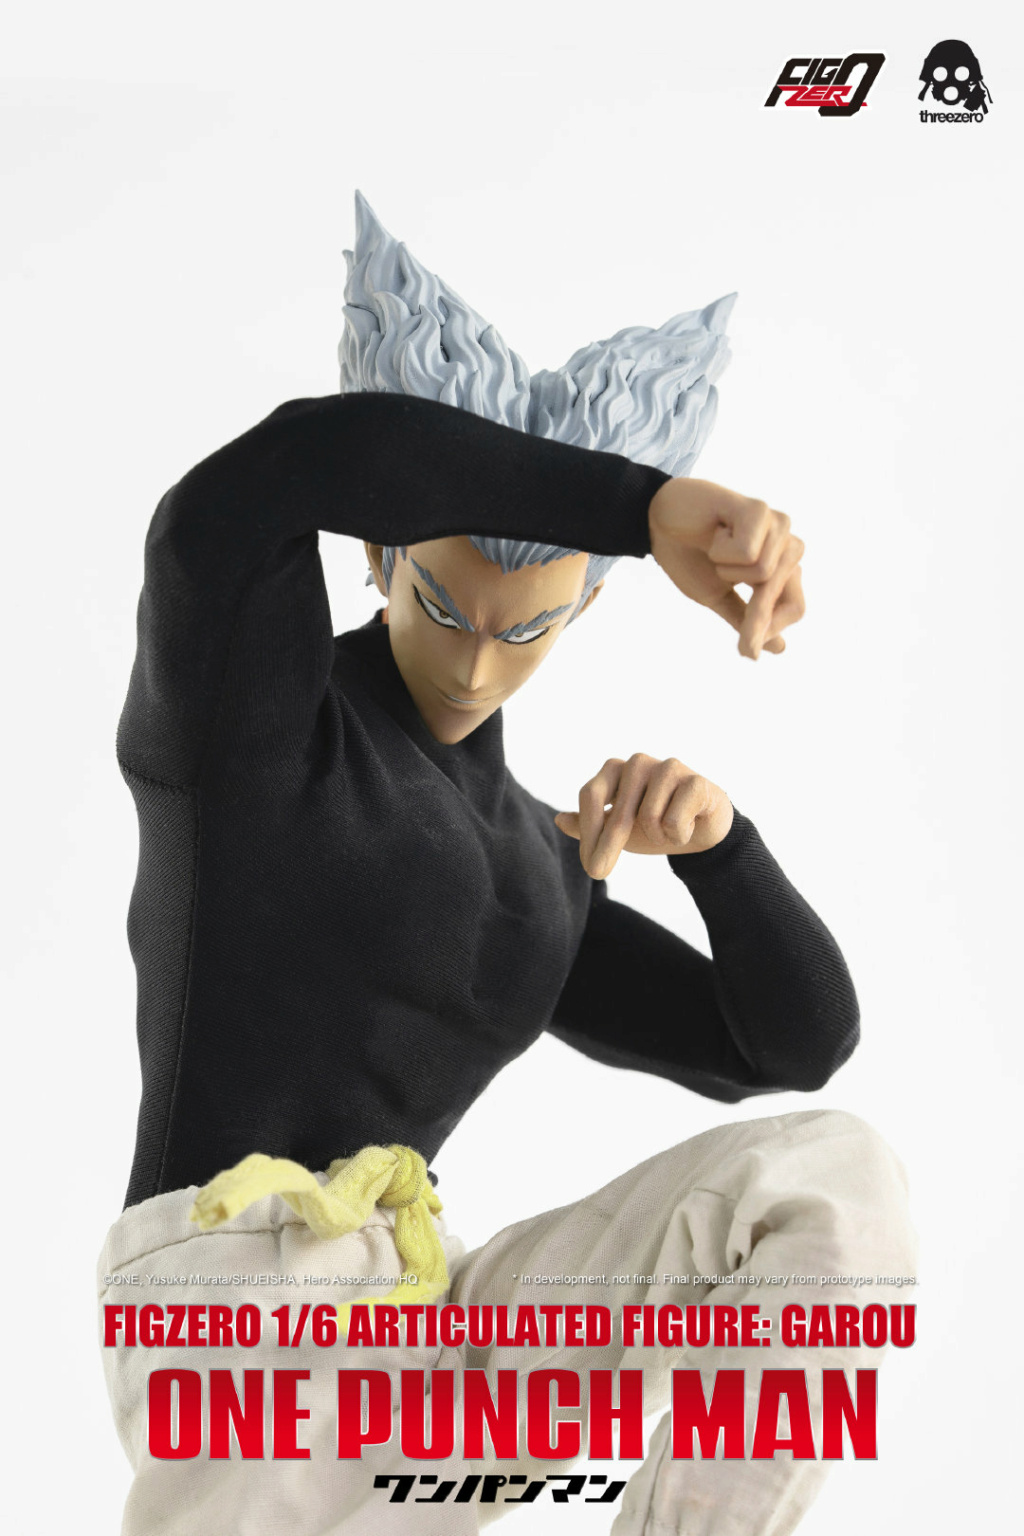 NEW PRODUCT: Threezero: 1/6 "One Punch Man" Season 2 Hungry Wolf Collectible Doll 11438